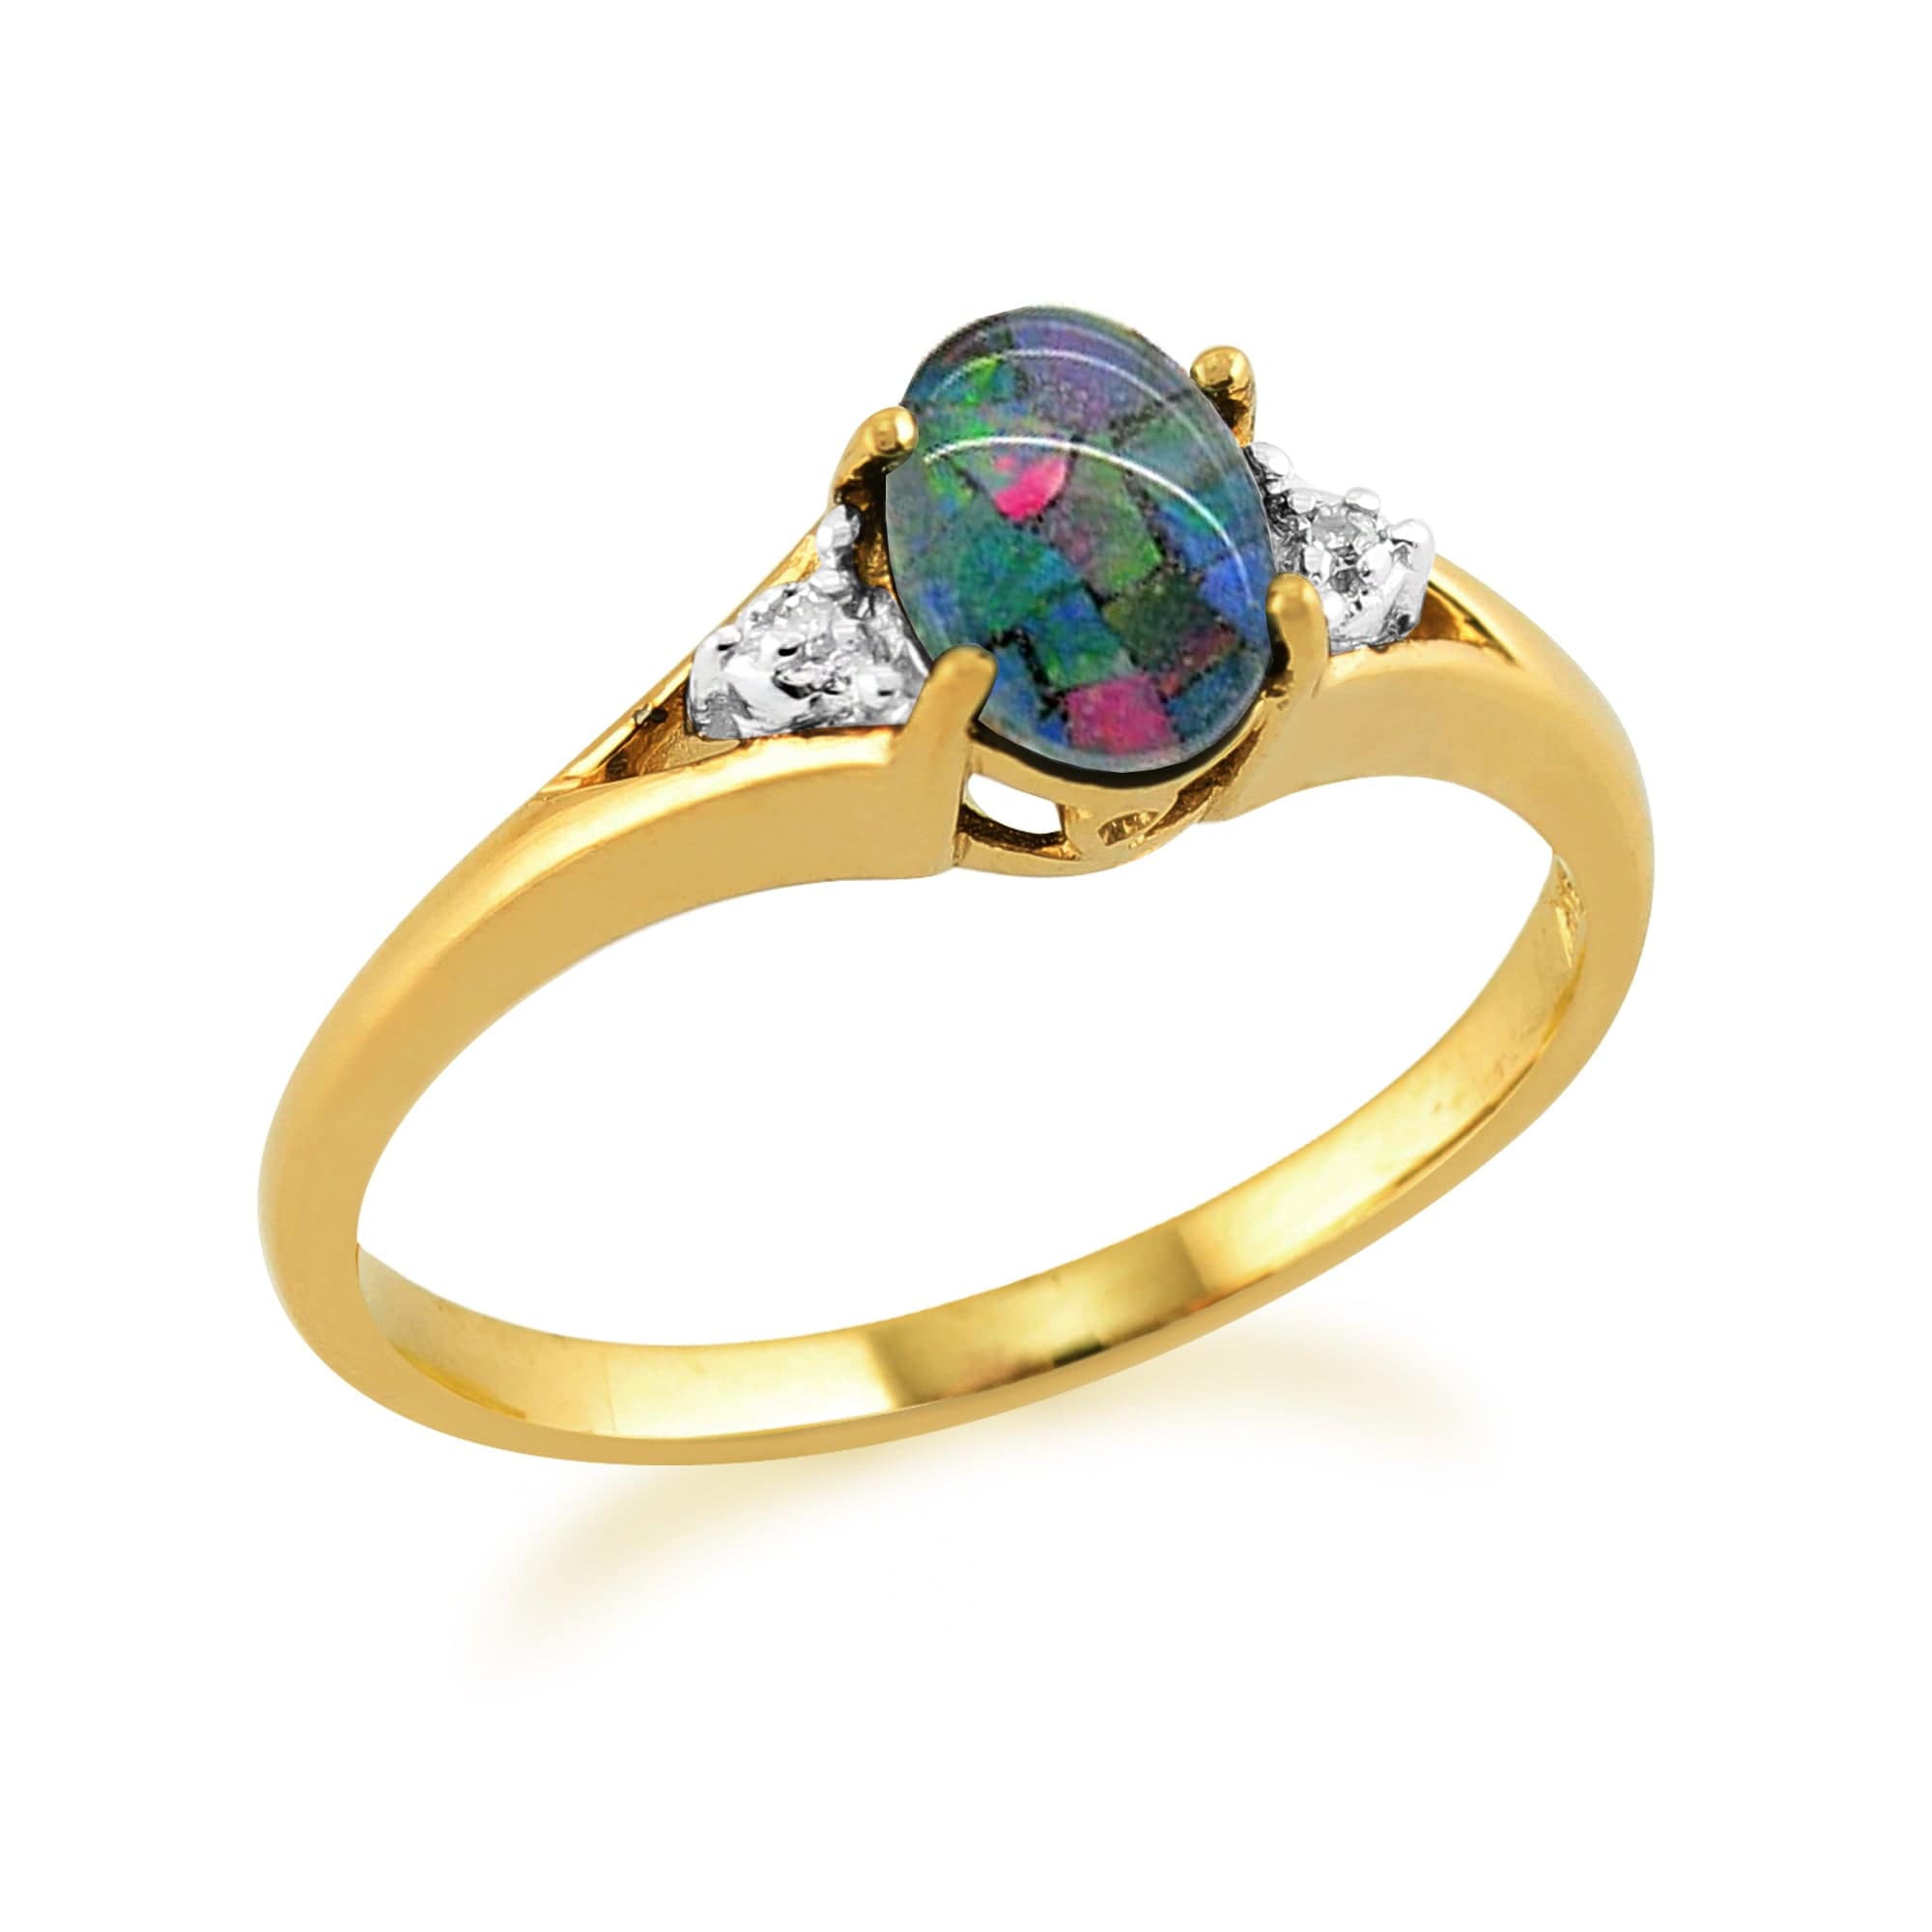 23518 Classic Oval Triplet Opal & Diamond Ring in 9ct Yellow Gold 3